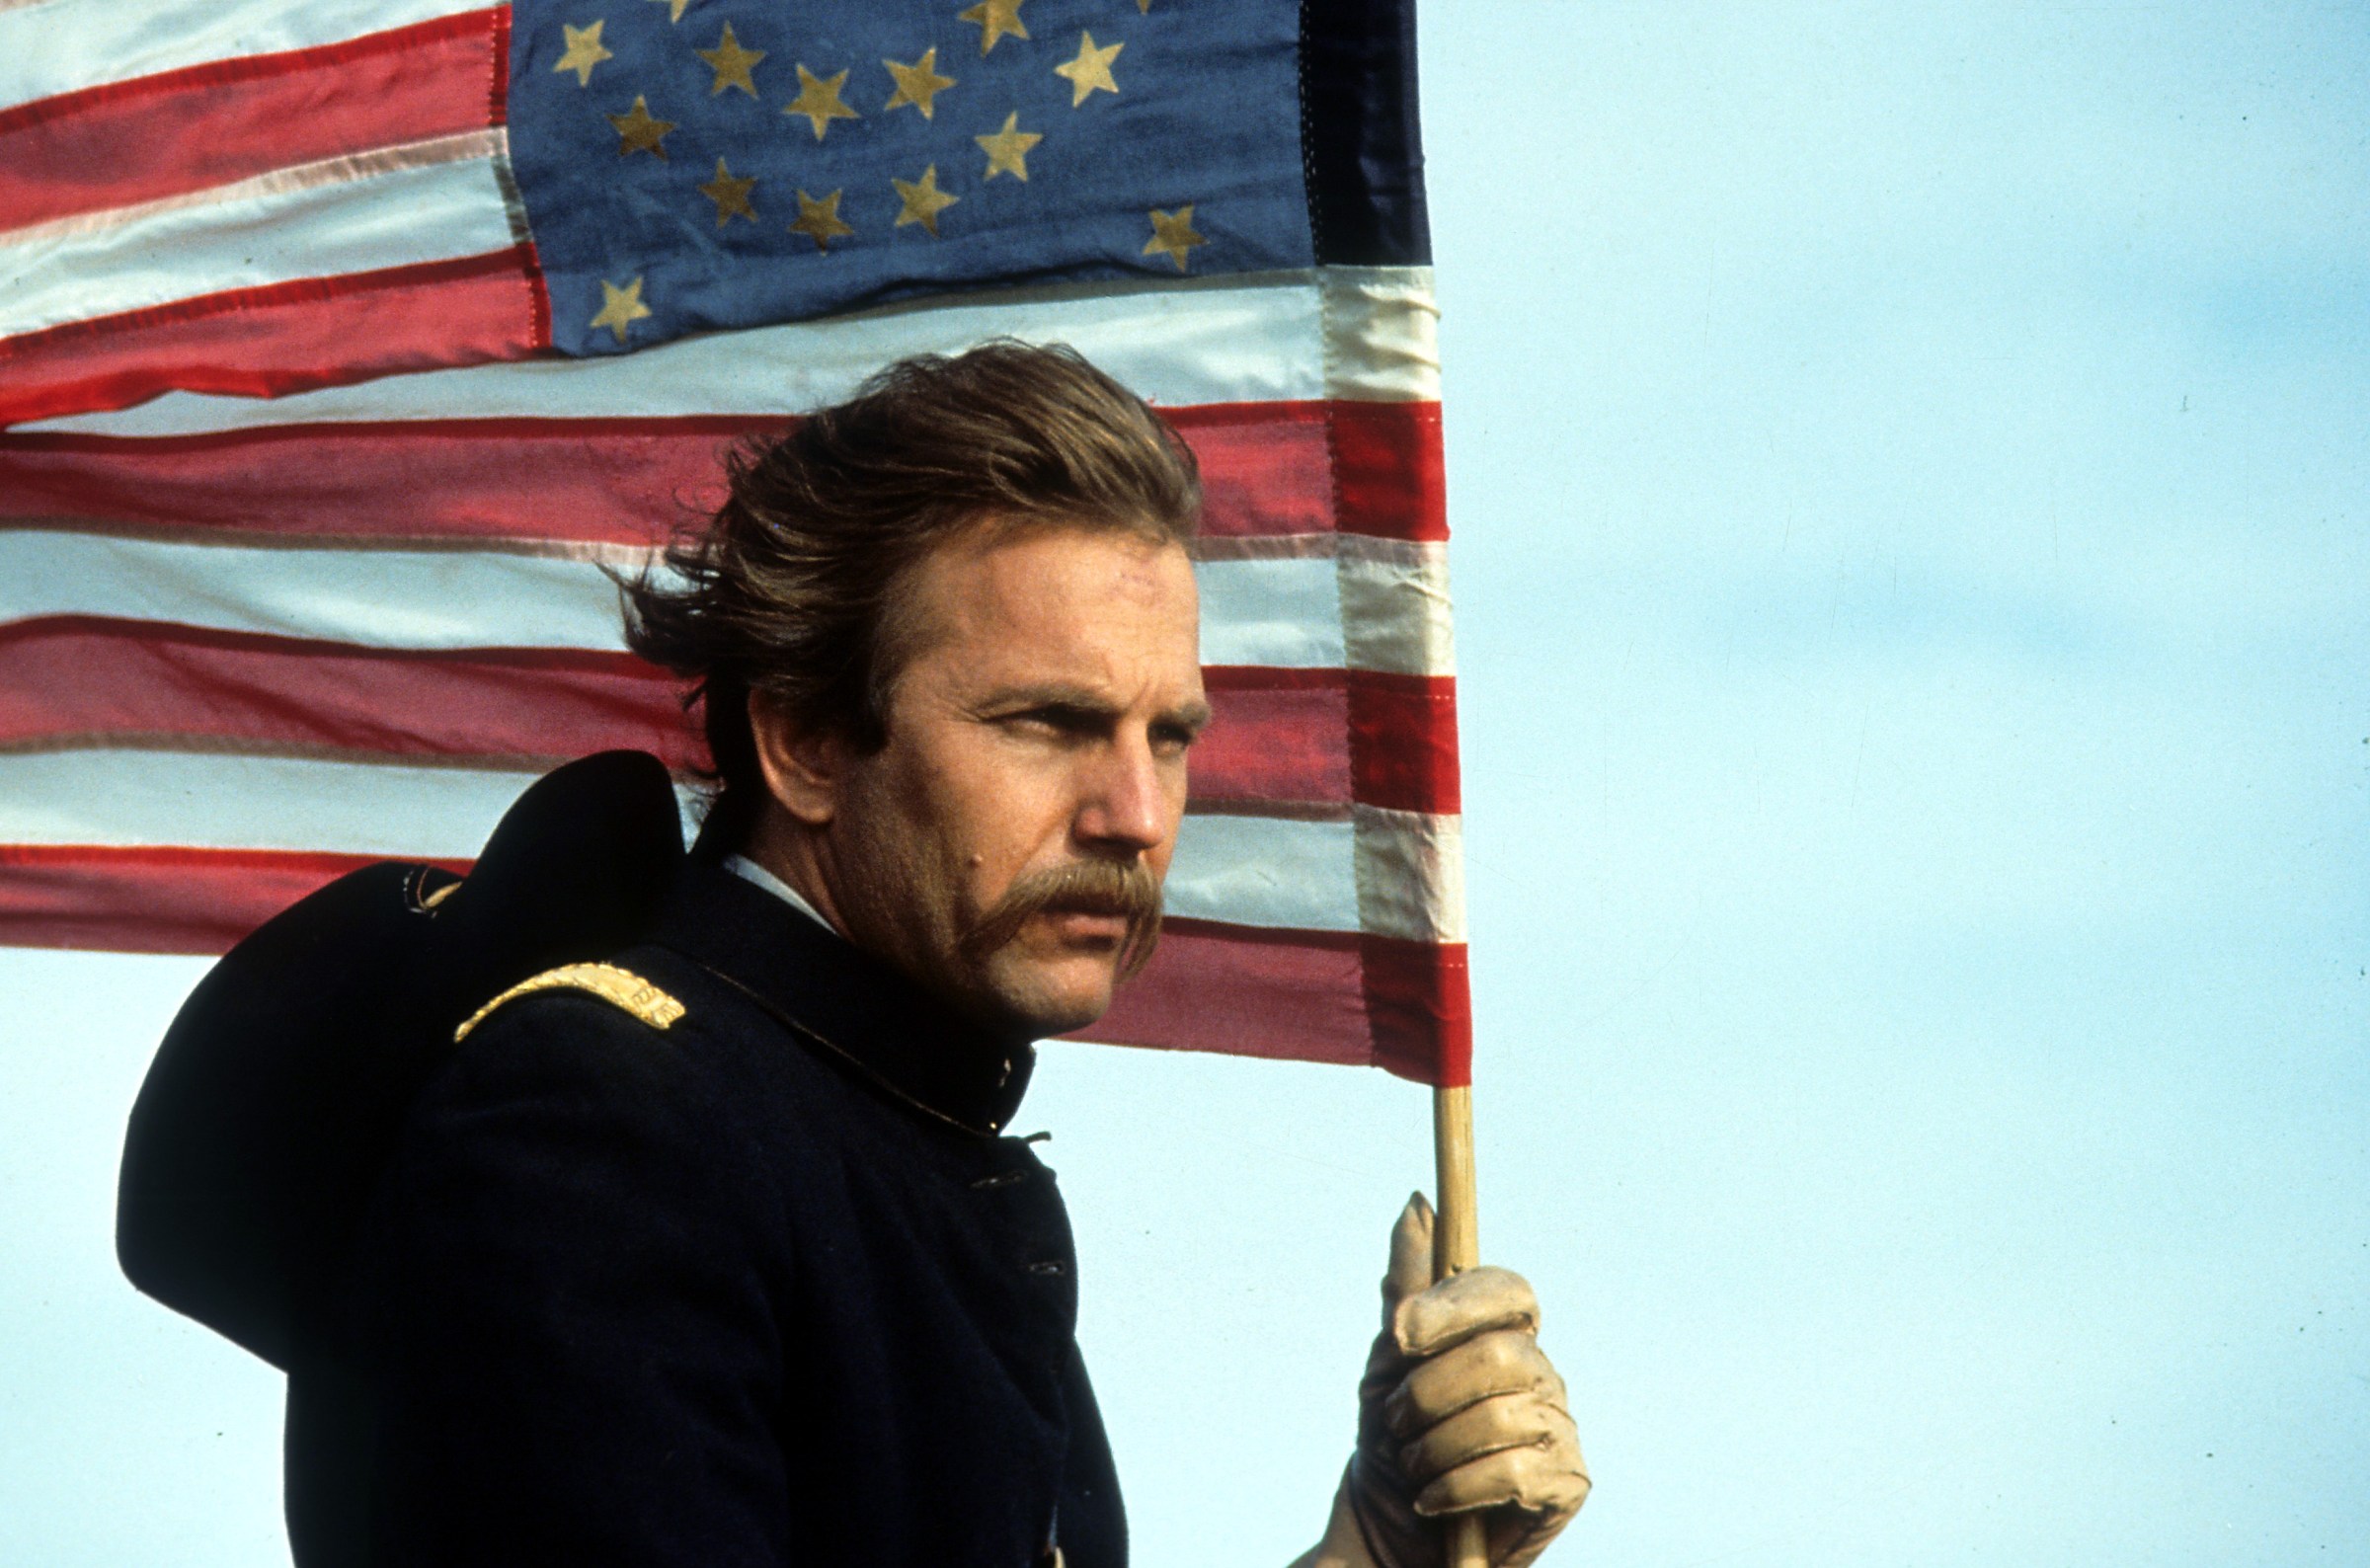 Kevin Costner holding an American flag in Dances With Wolves.